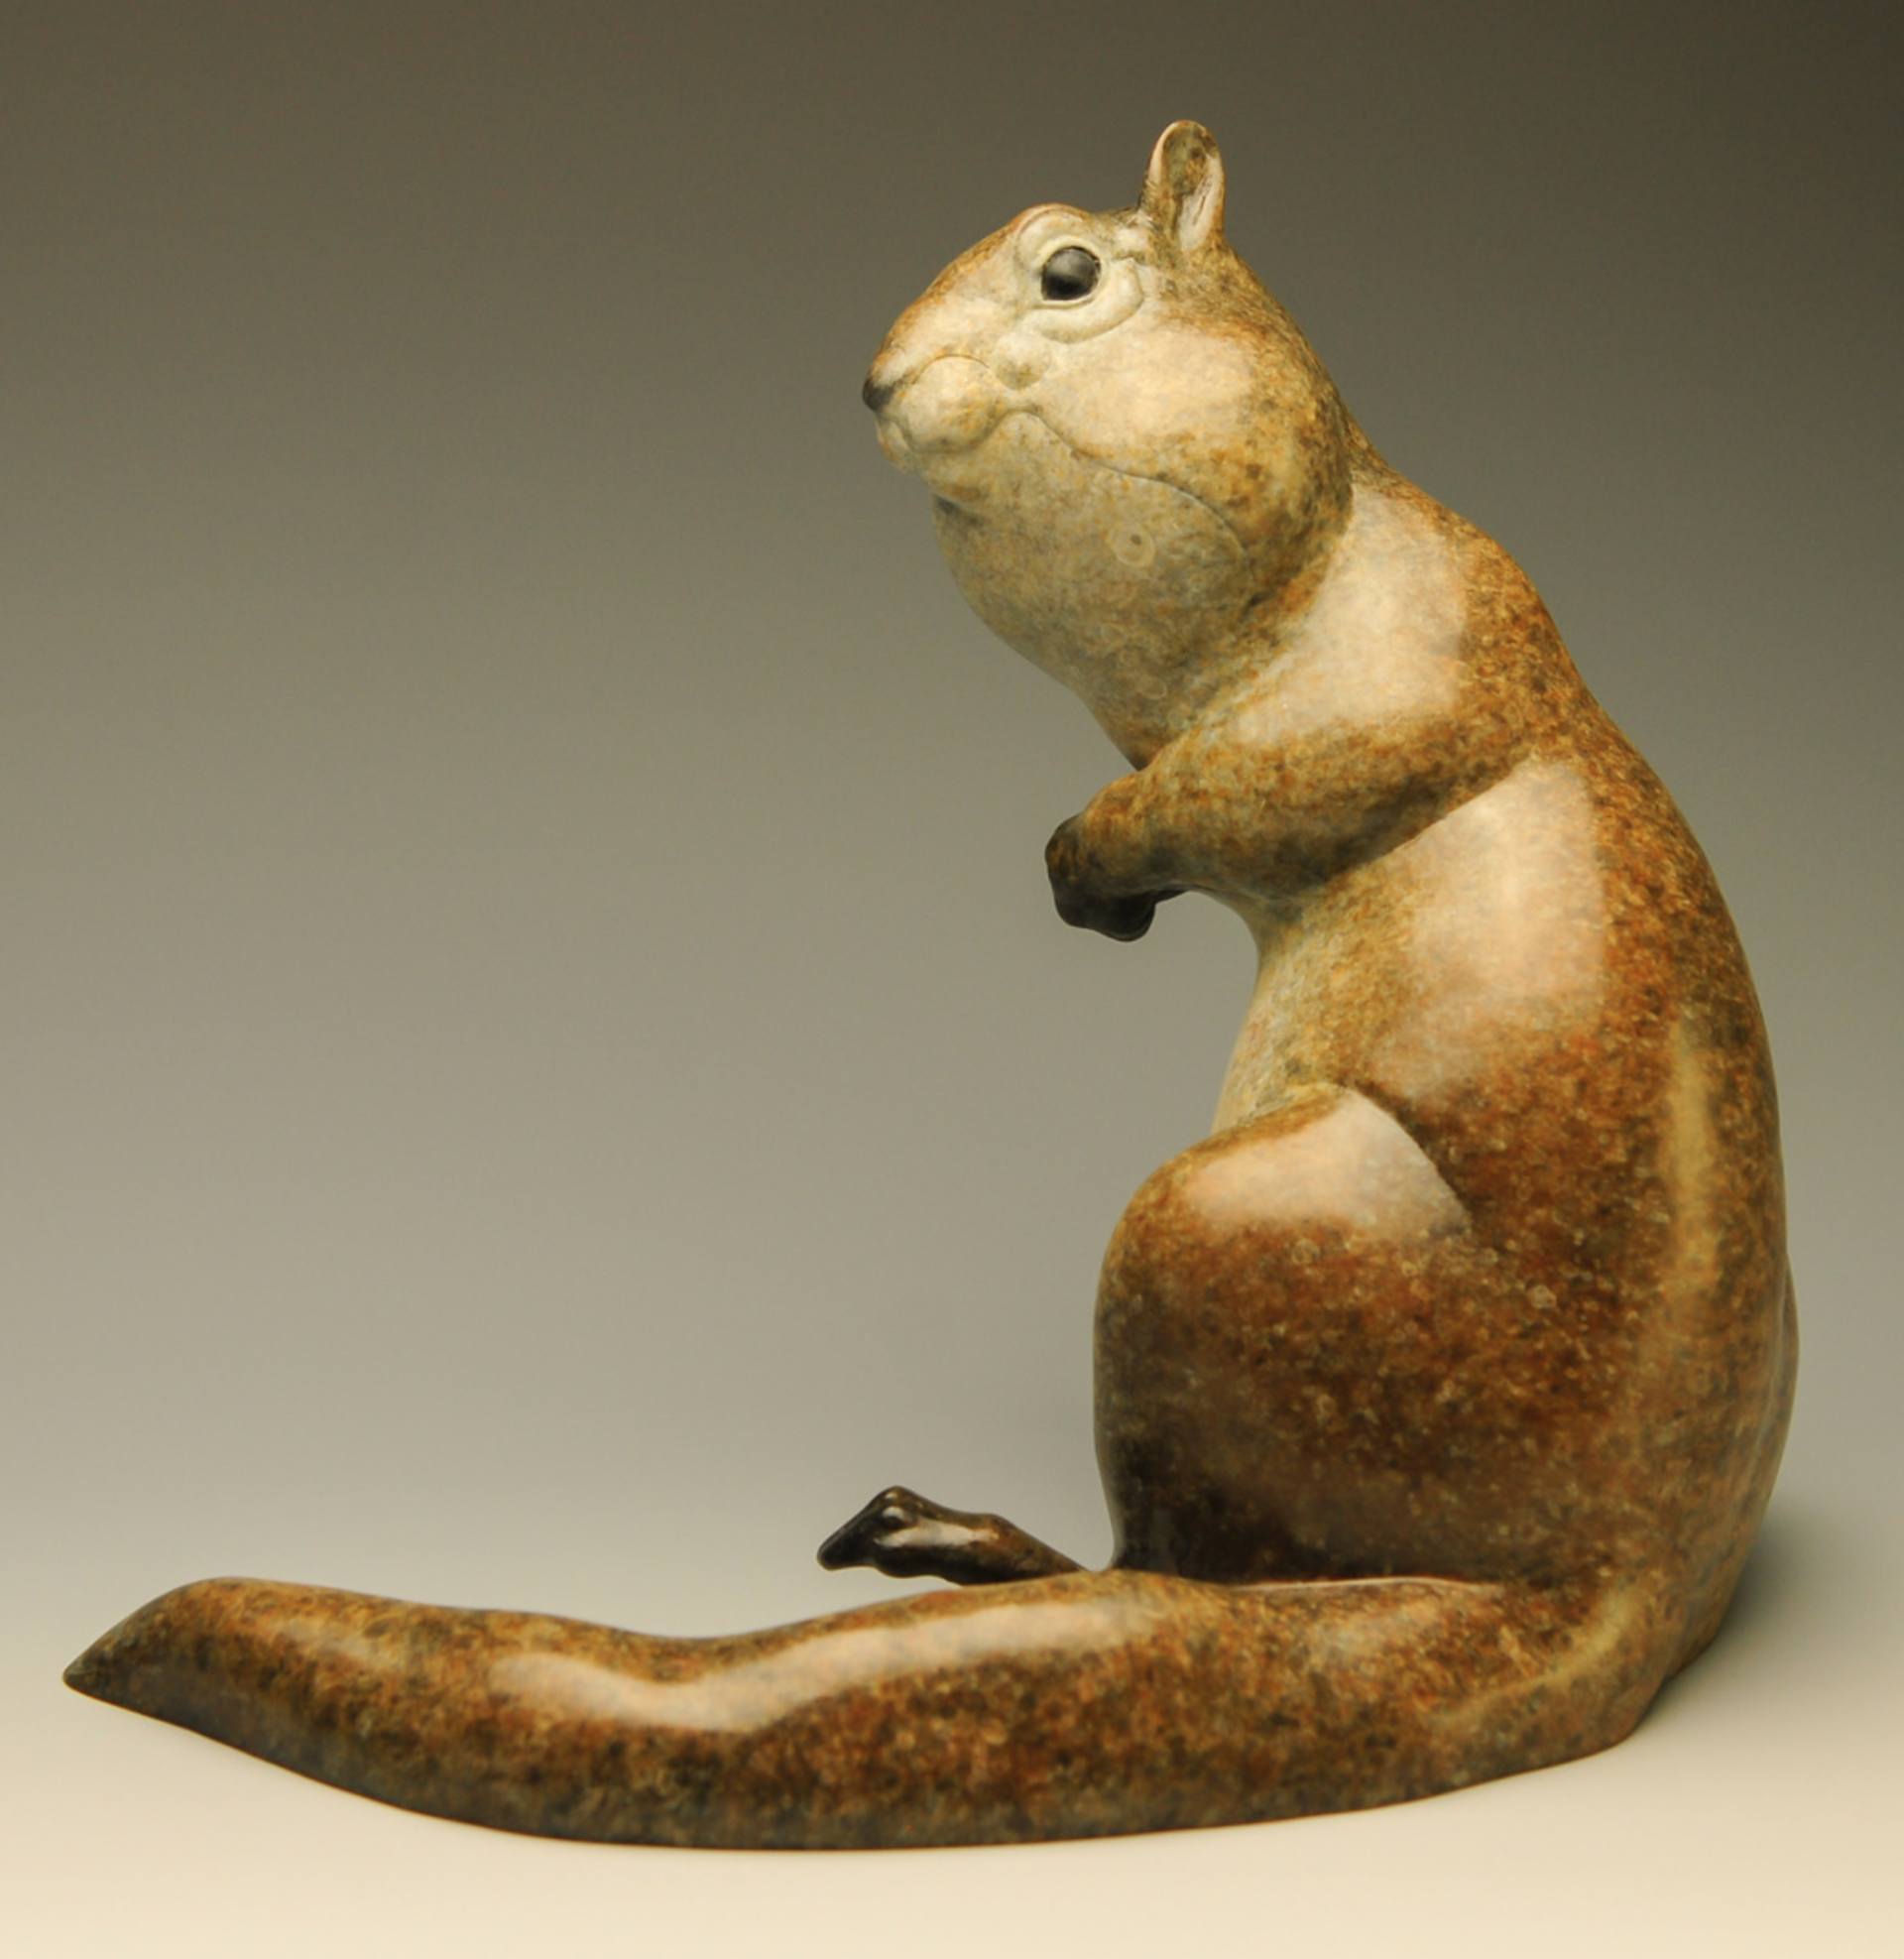 A Contemporary Bronze Of A Squirrel With Big Cheeks By Jeremy Bradshaw At Gallery Wild